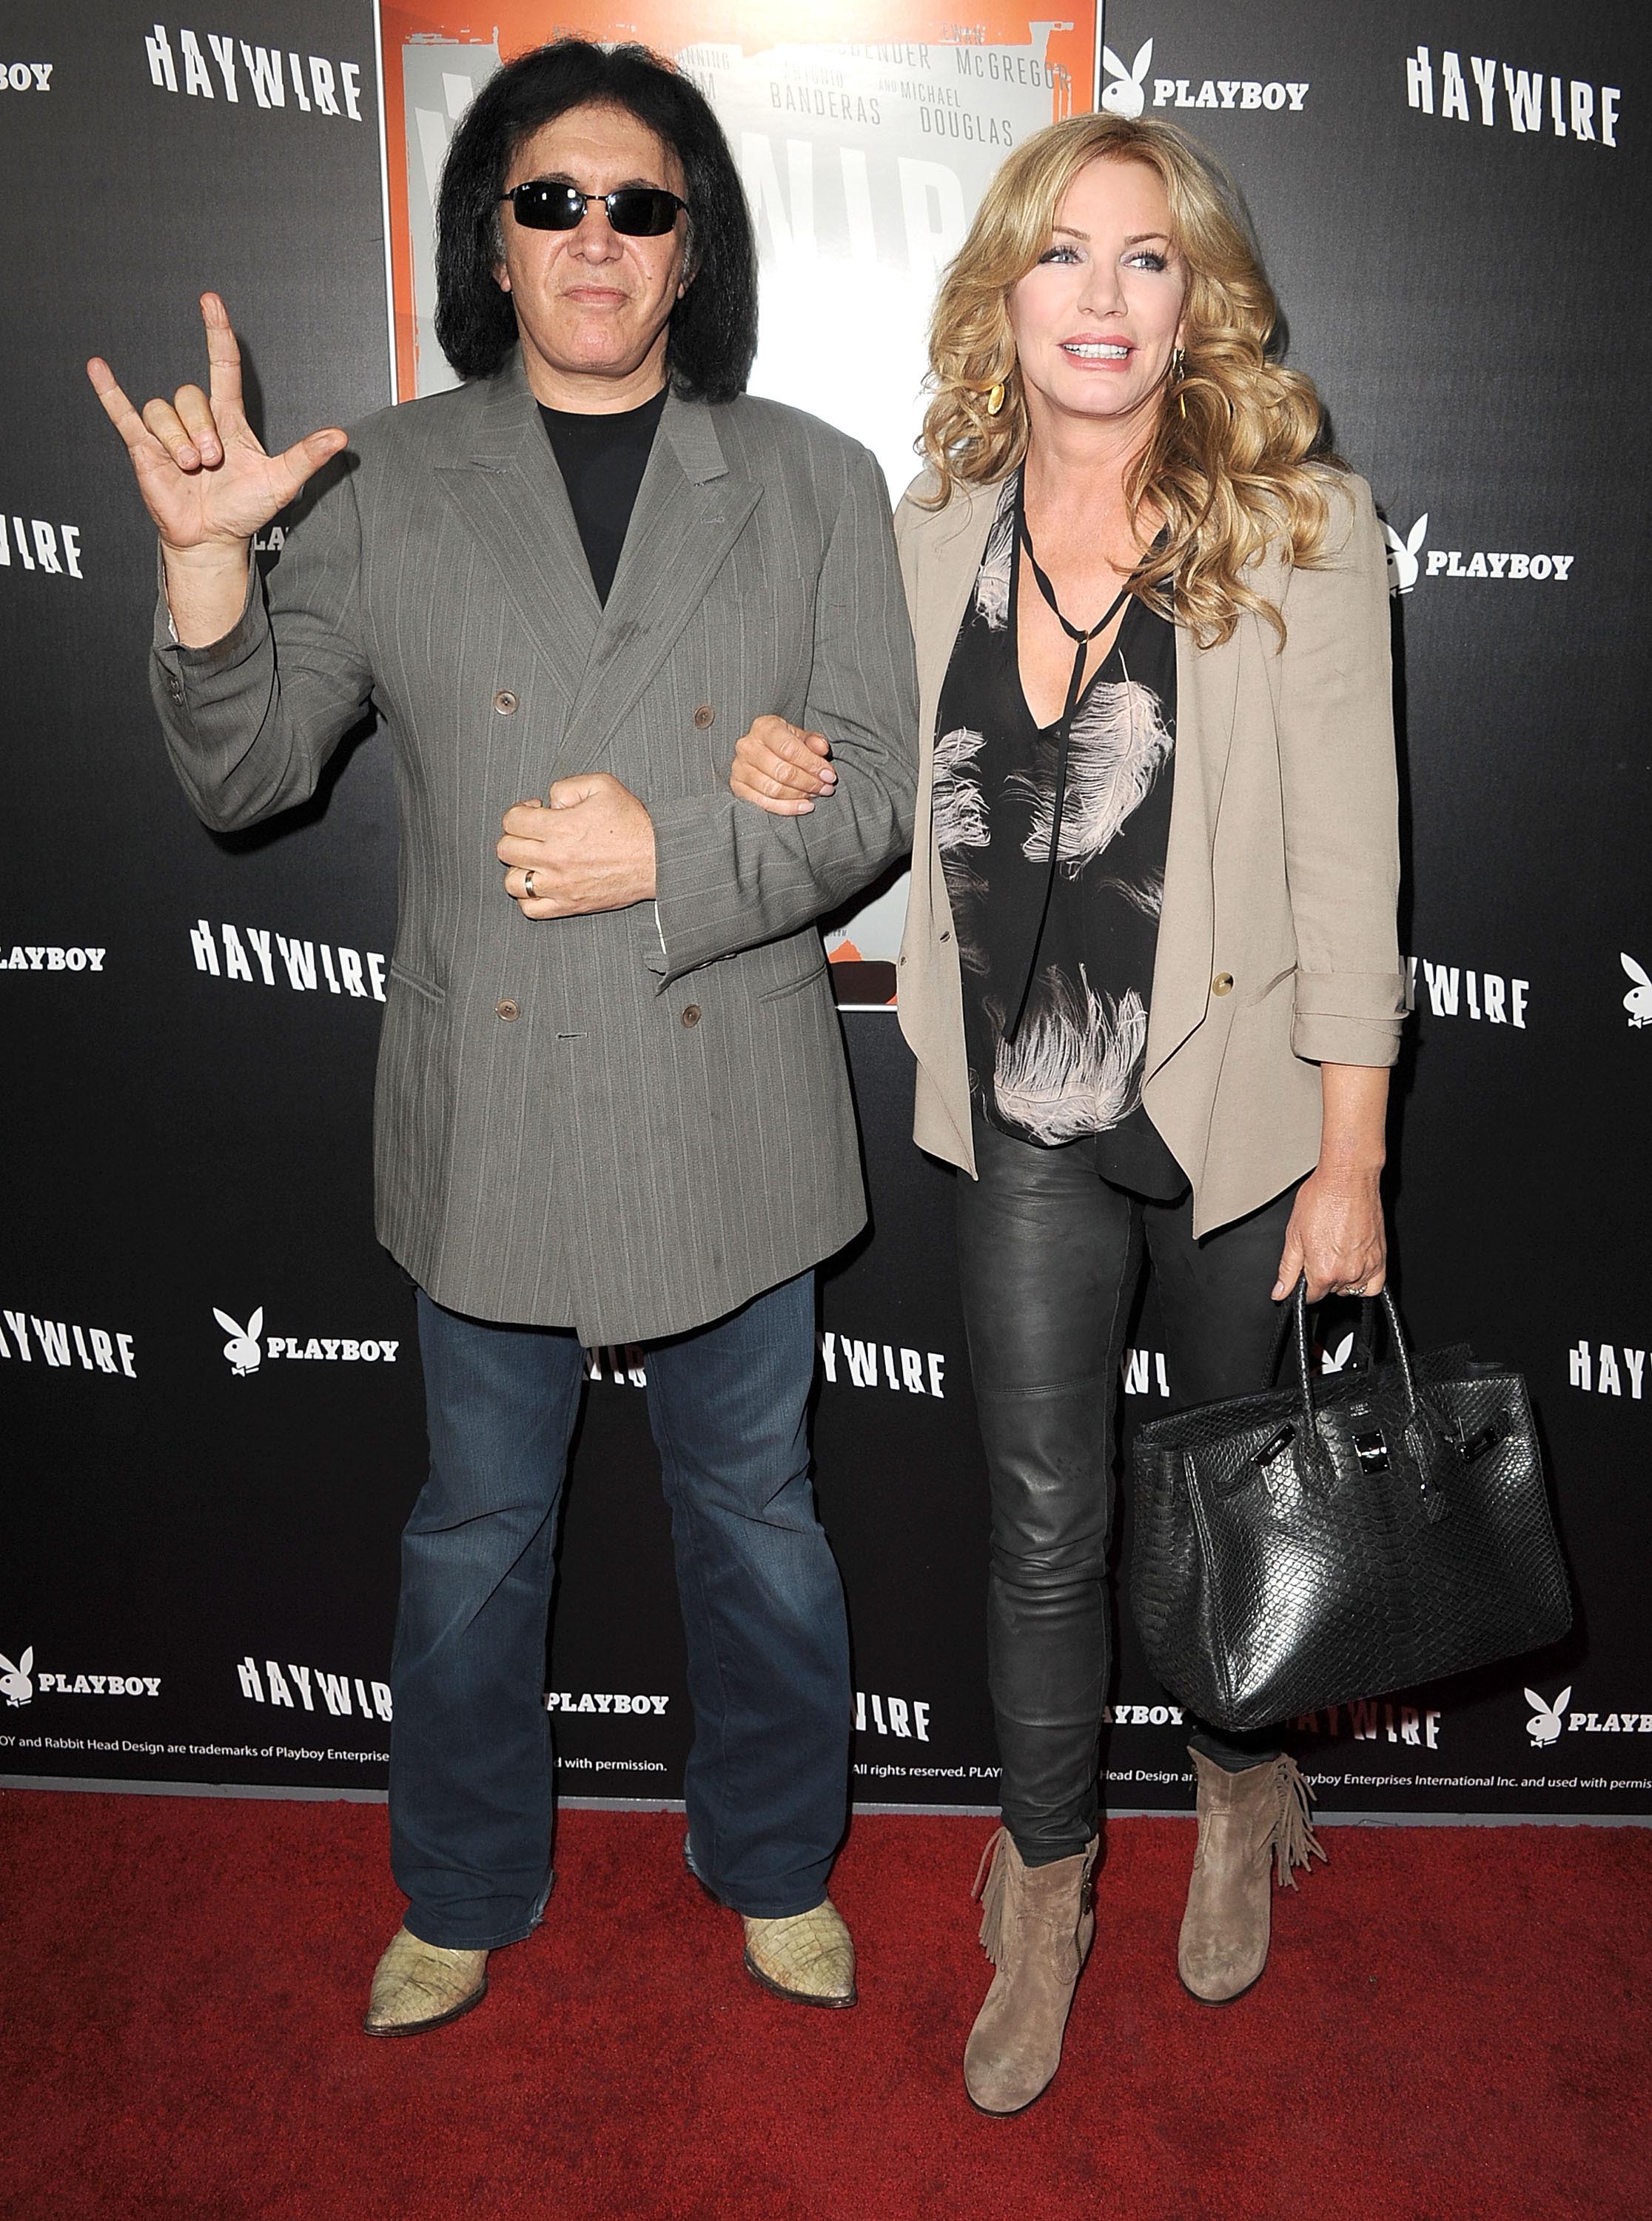 Shannon Tweed arrives at Relativity Media’s premiere of ‘Haywire’